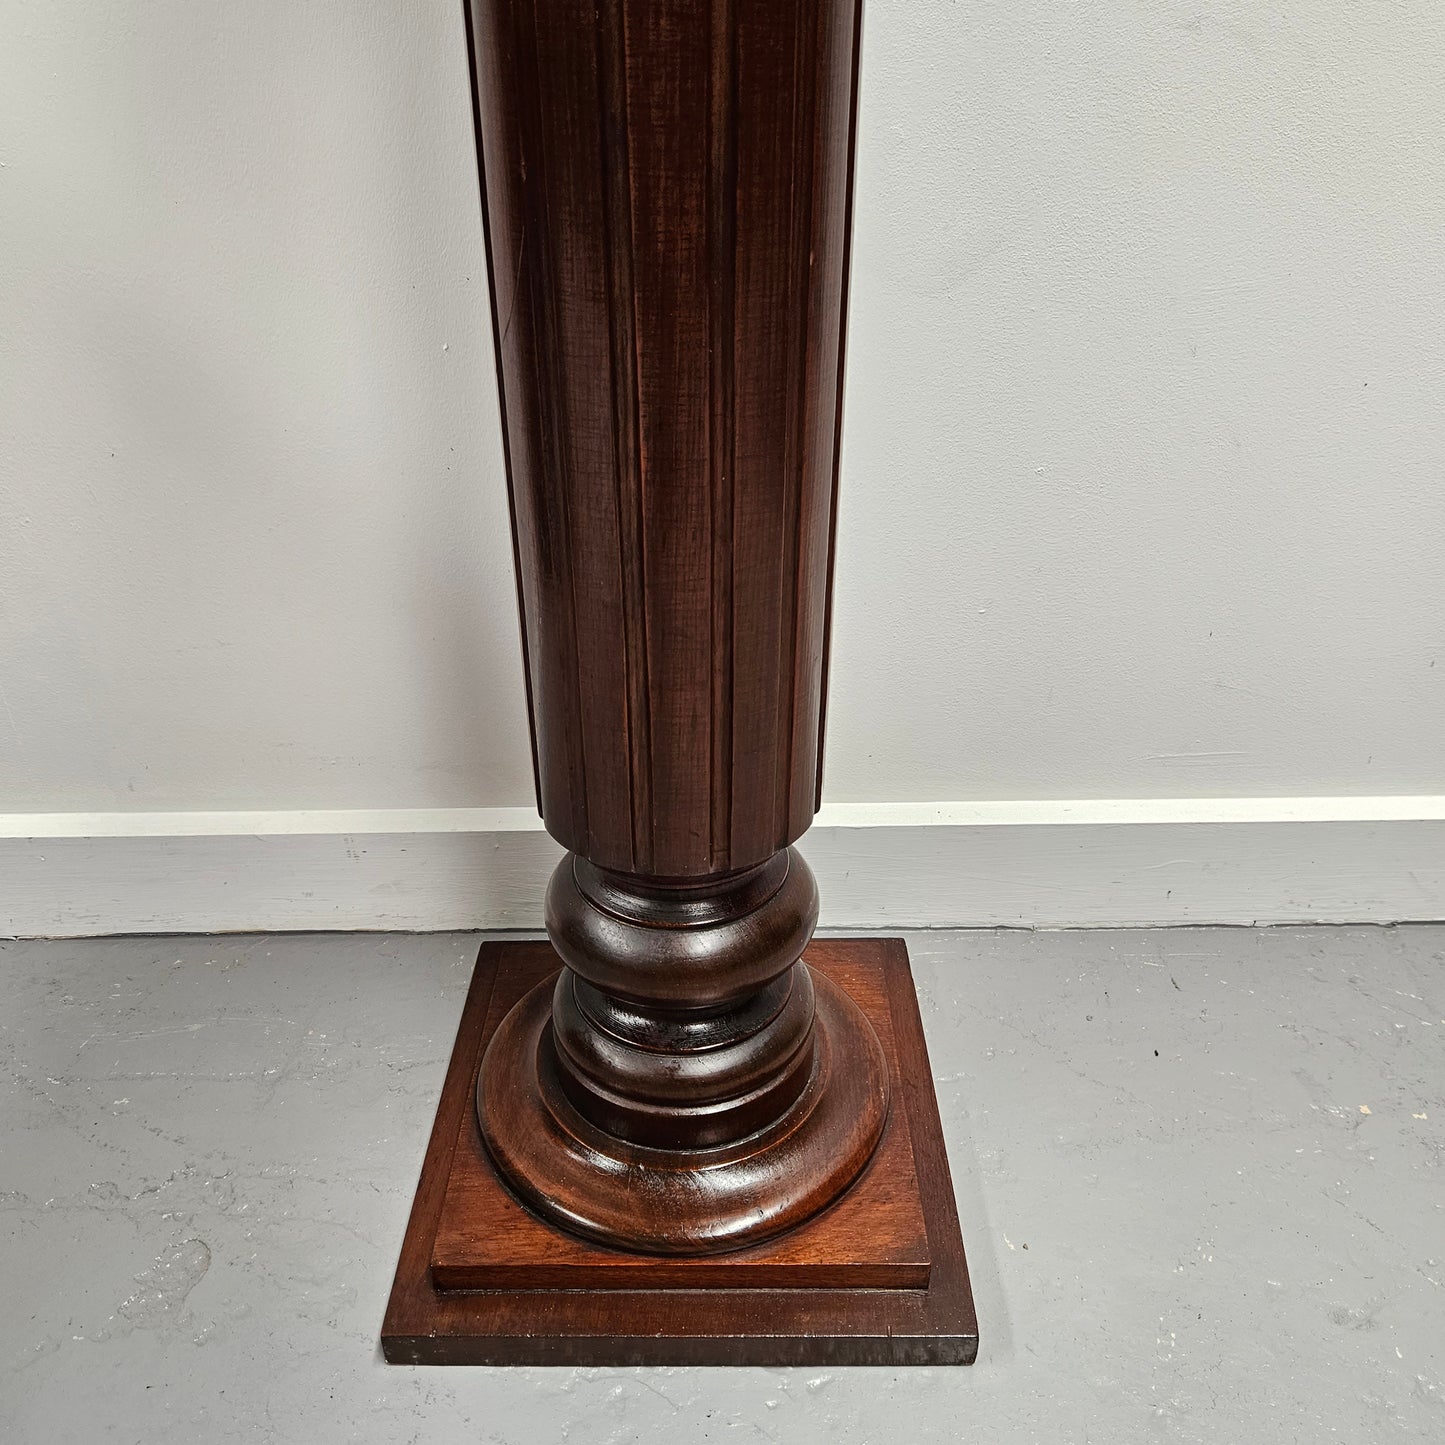 Amazing blackwood gun barrel pedestal with a great design. It is in good original condition. Please see photos as they form part of the description.